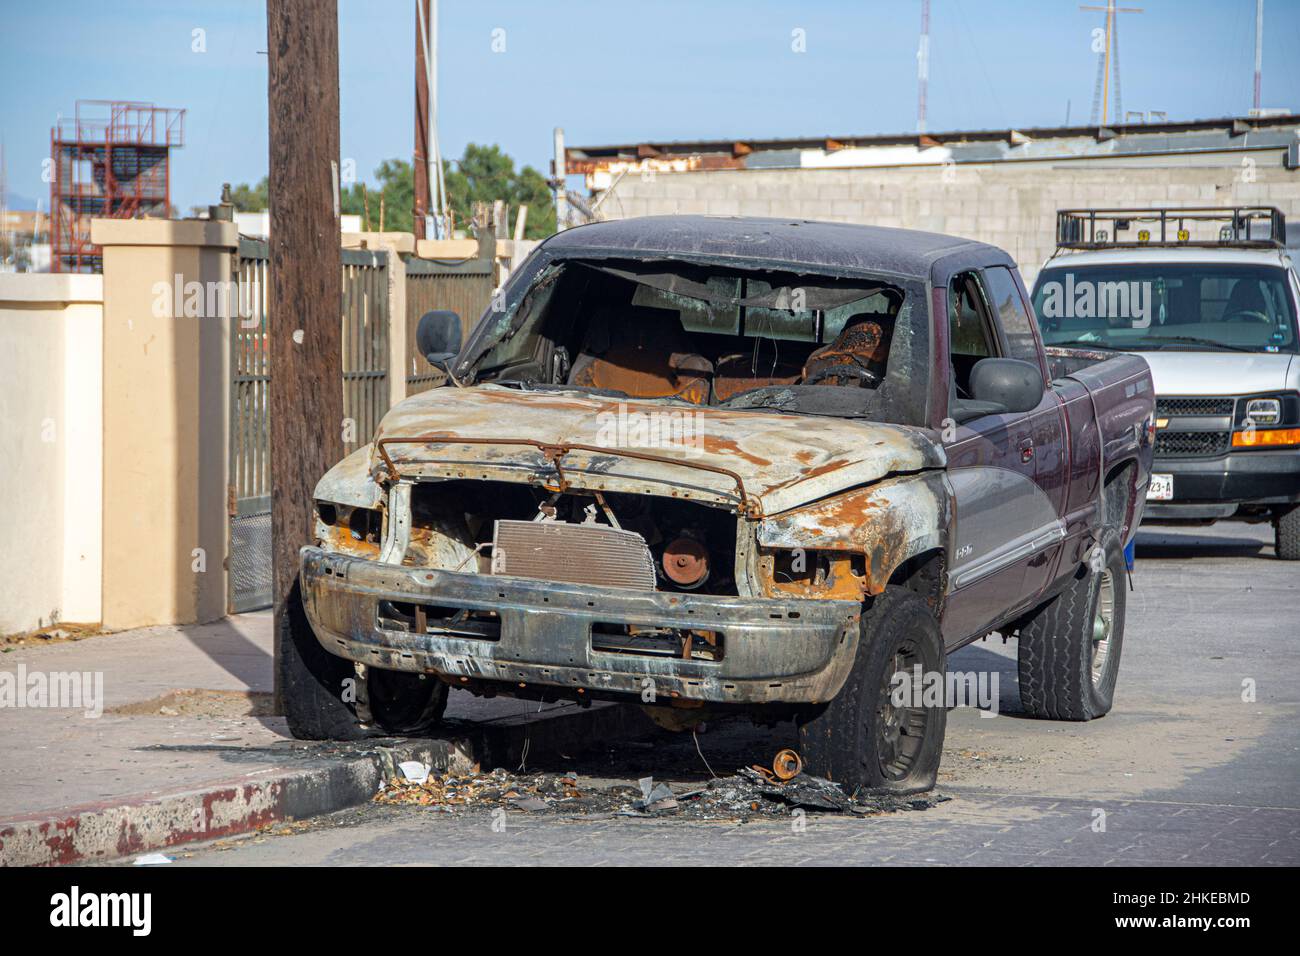 An old, junky truck that was in an accident. Puerto Penasco, Mexico. Stock Photo